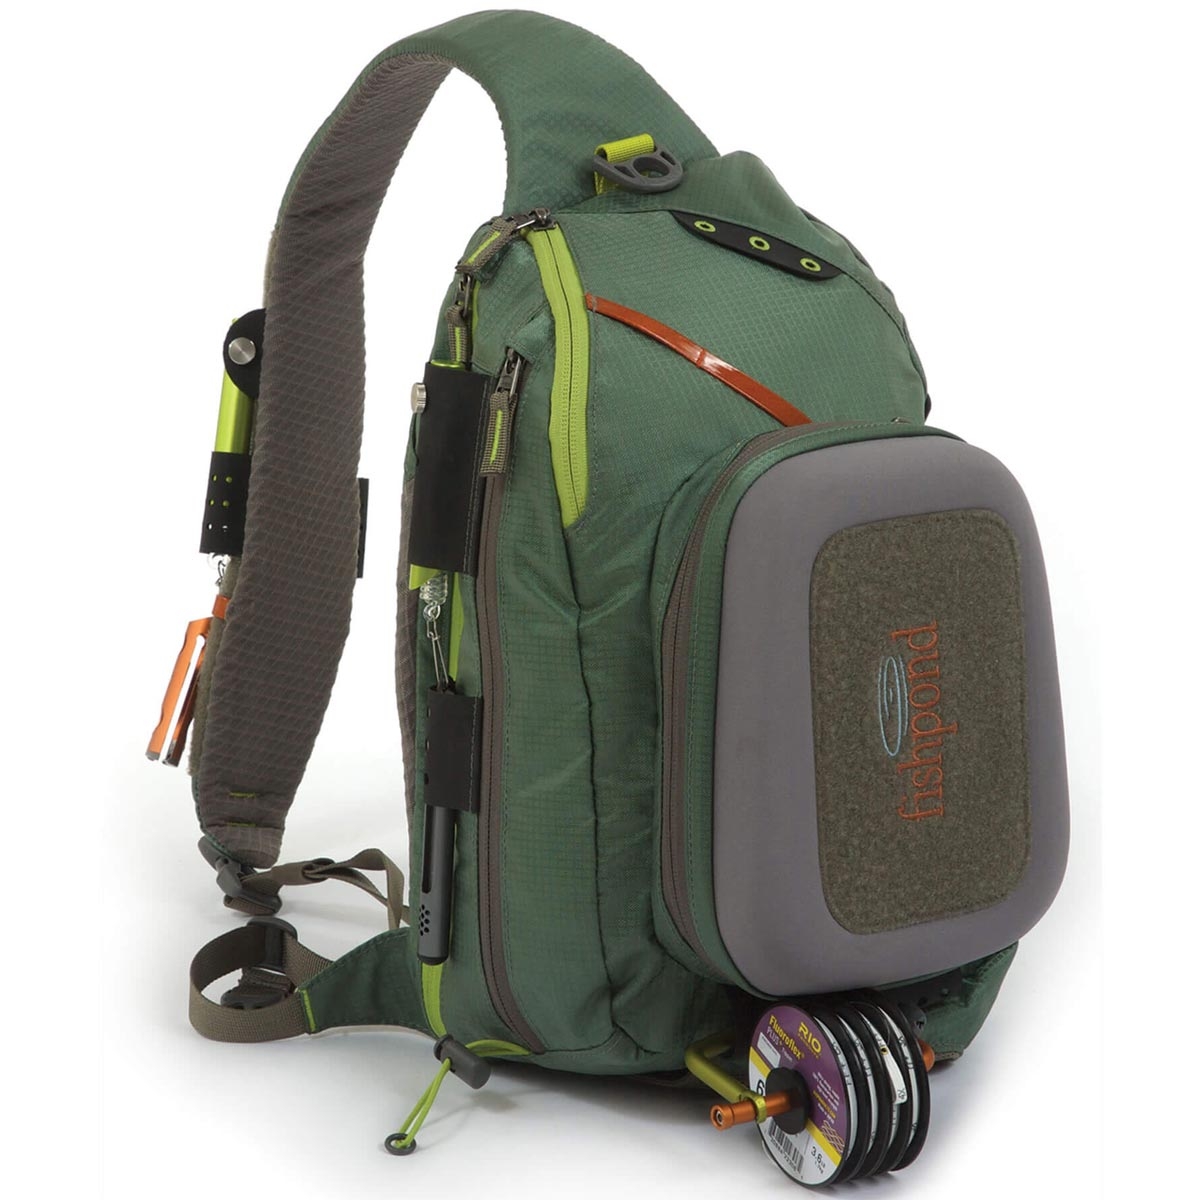 Fishpond Luggage - Angling Active